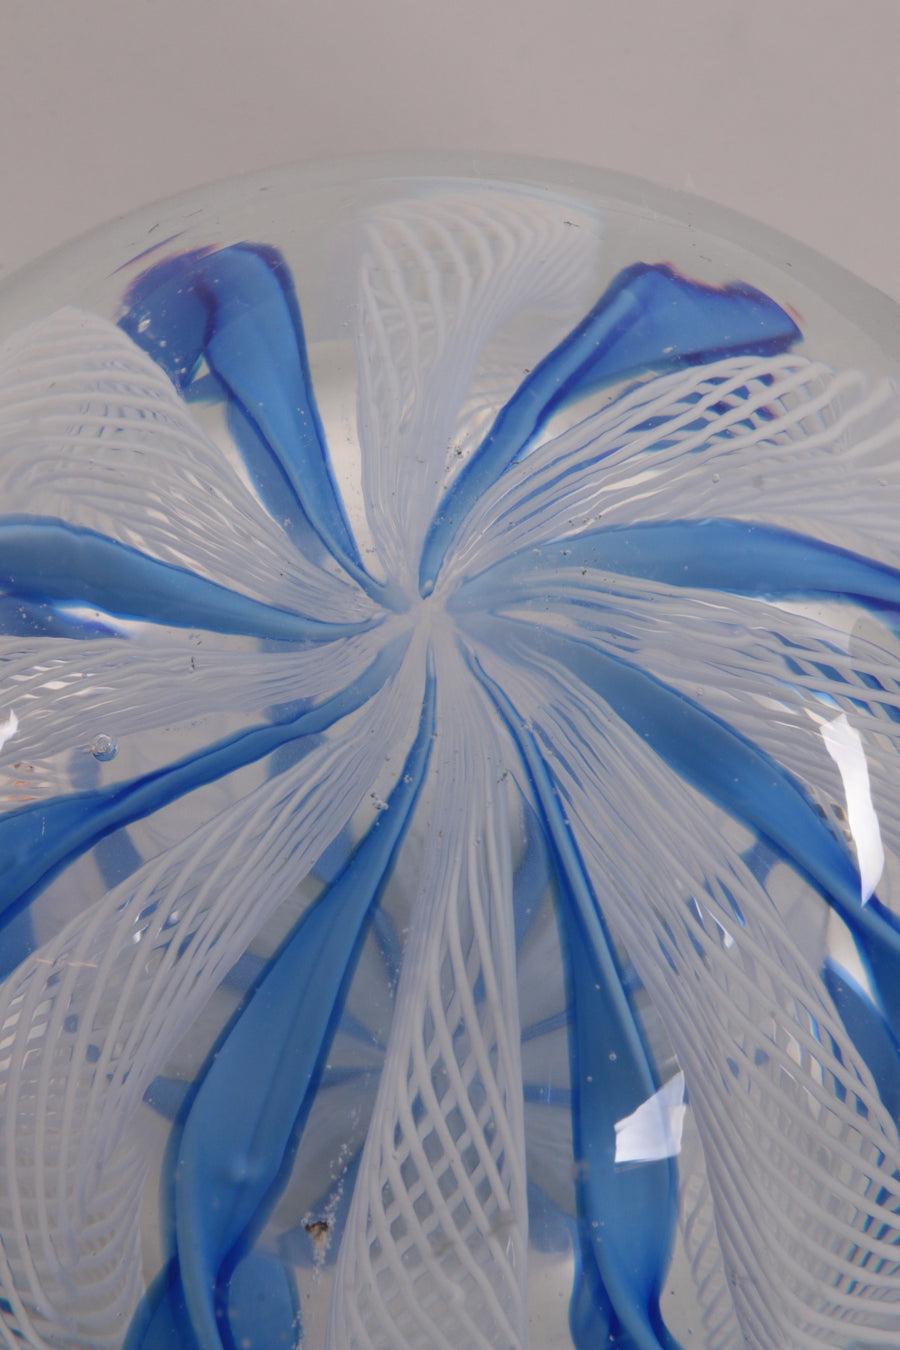 Mid-Century Modern Murano Paperweight with Blue and White Spirals, 1960